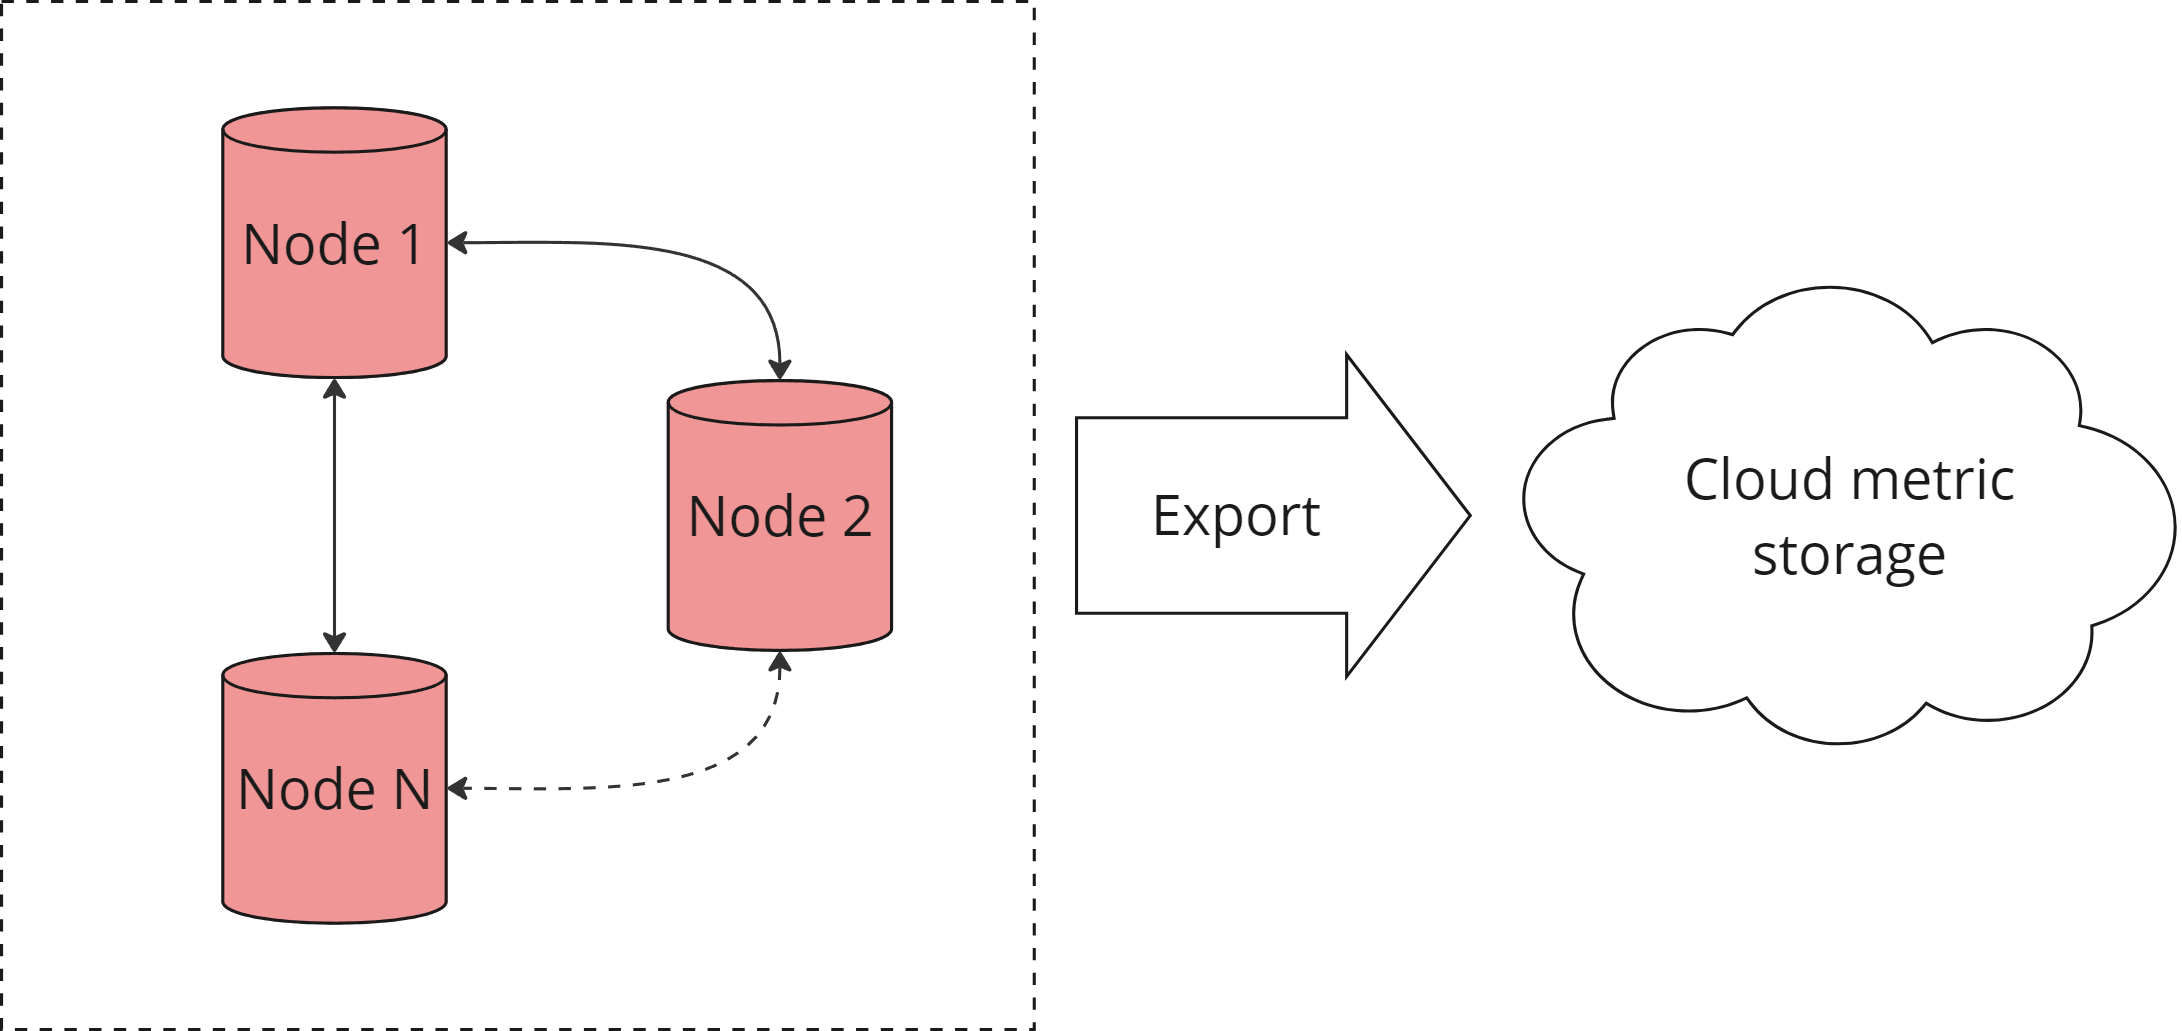 Pic 2. Metric export form N nodes of an Apache ignite cluster.